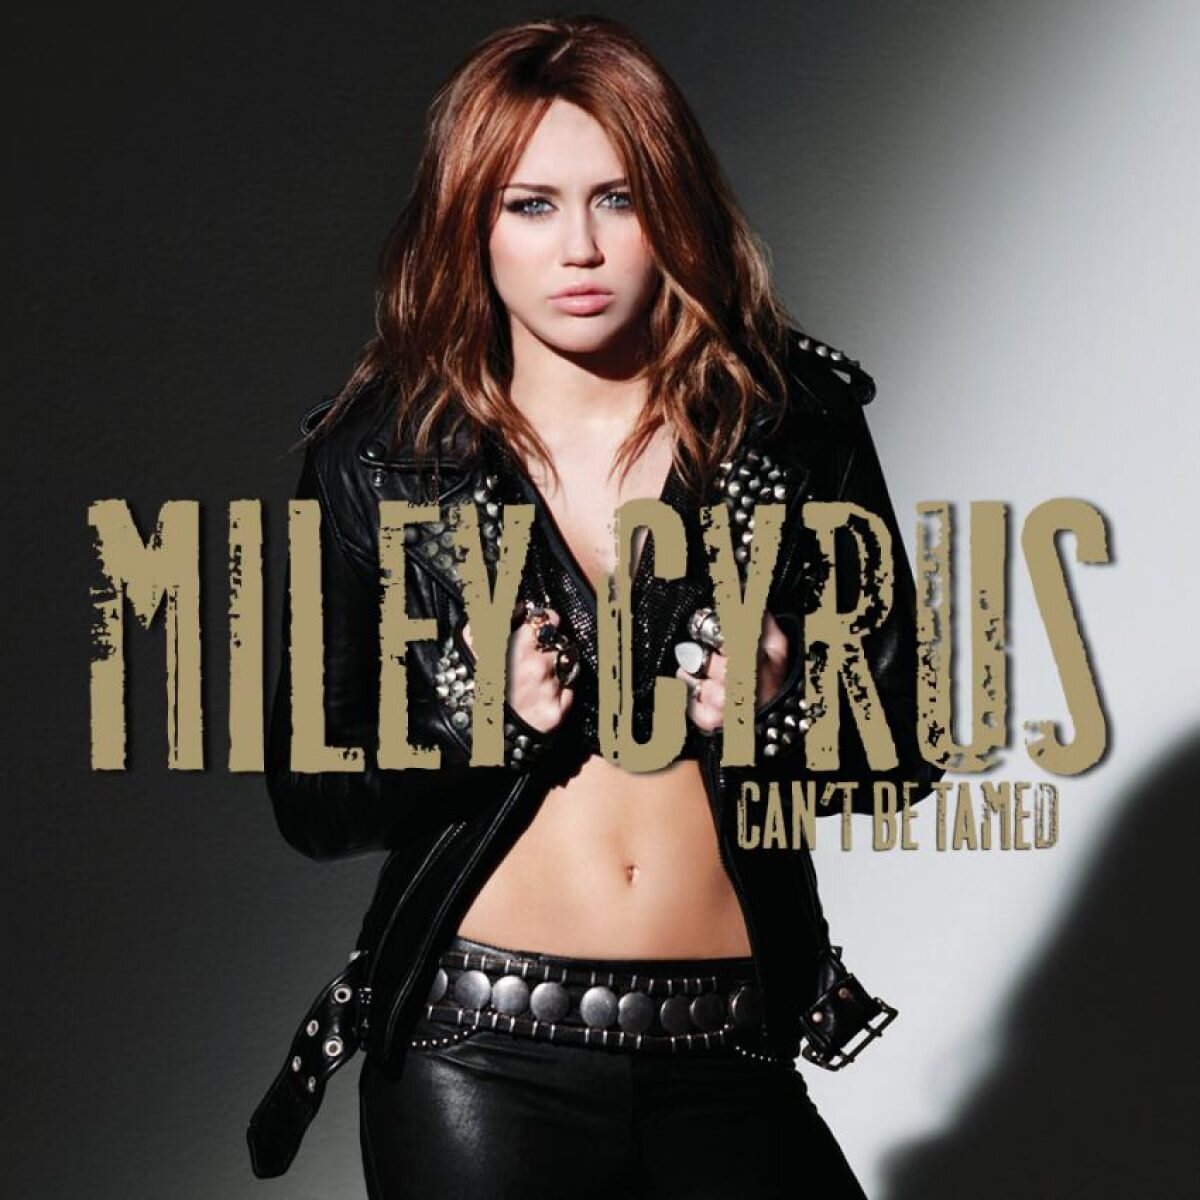 Miley-Cyrus-Cant-Be-Tamed-Album-Cover-1200x1200.jpg